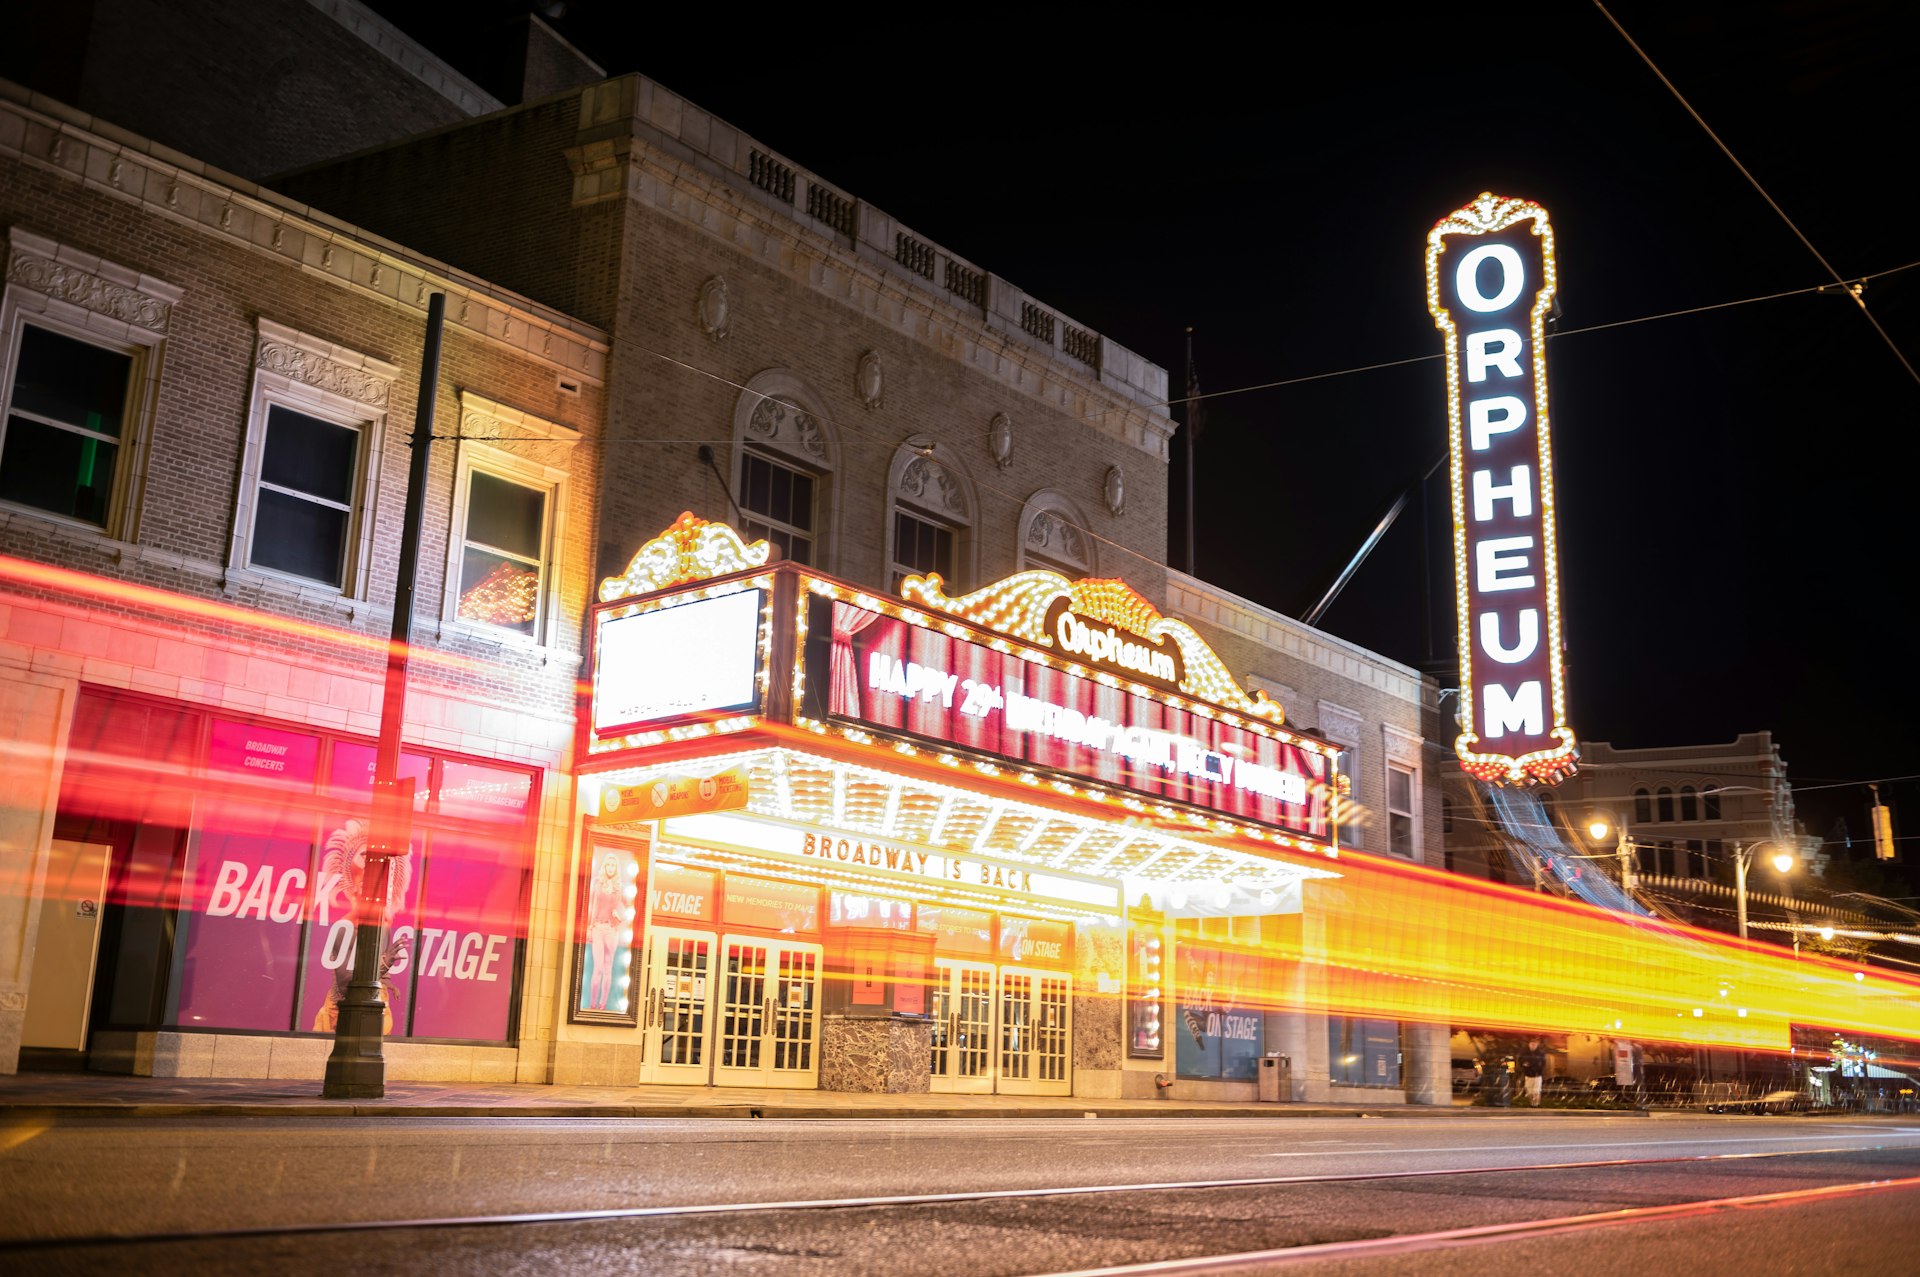 The neon frontage of a theater, with a large lit-up vertical sign that says "Orpheum" 